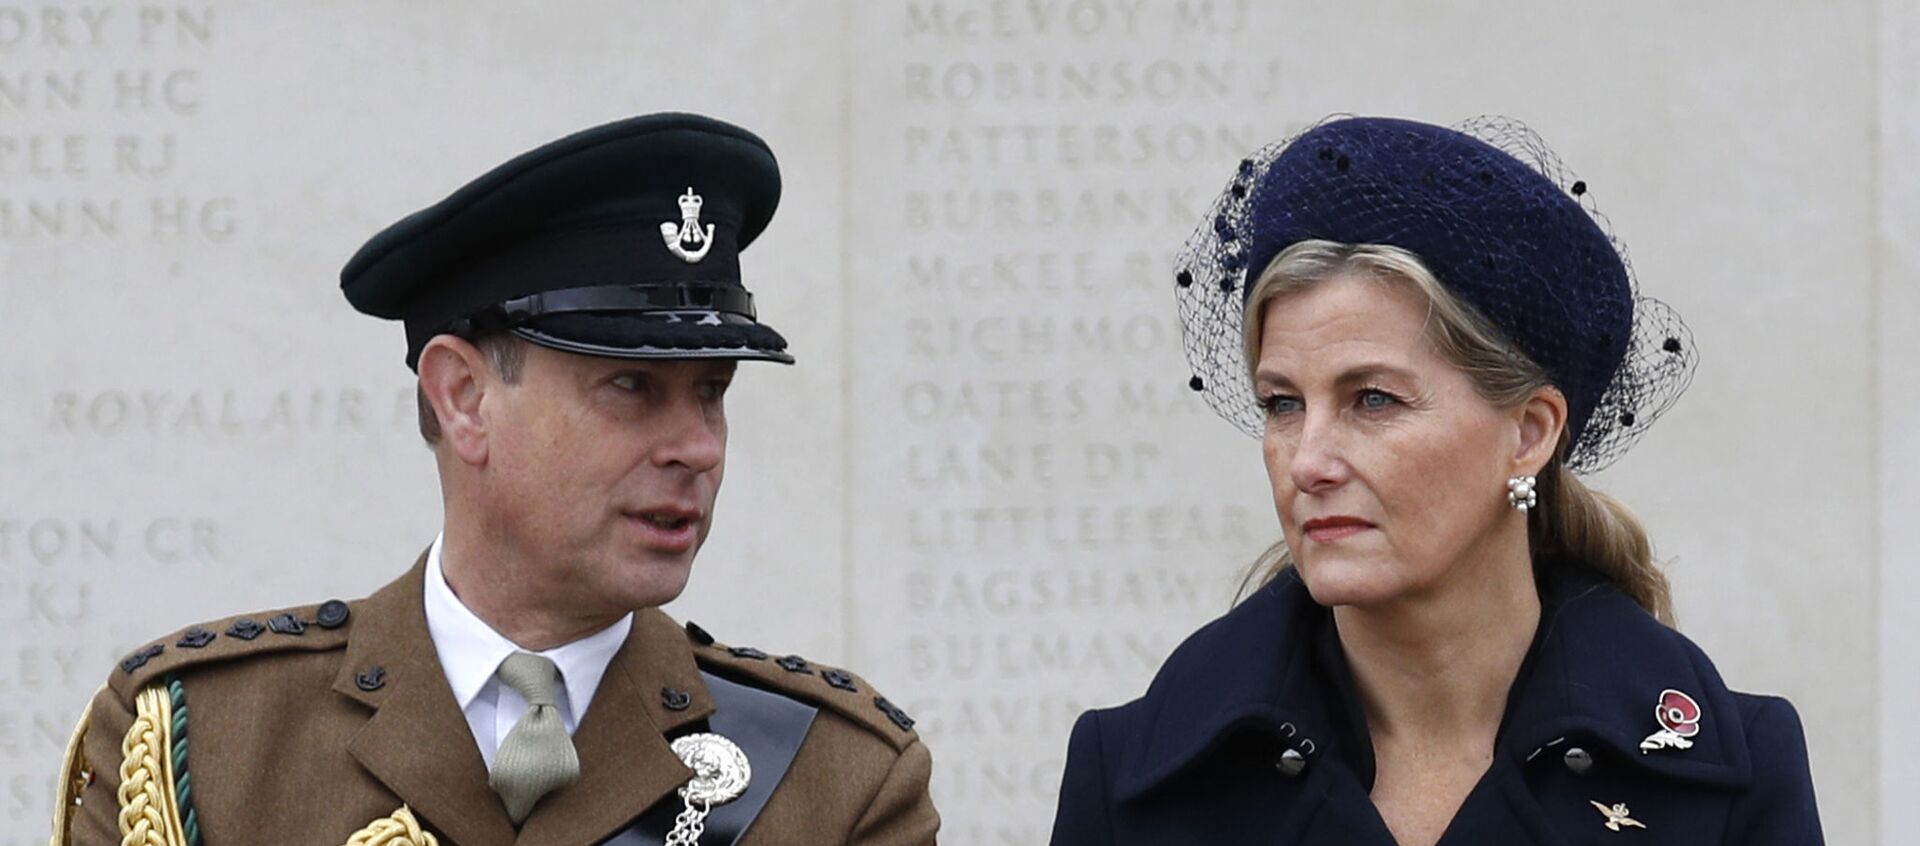 Britain's Prince Edward, Earl of Wessex (L) and Britain's Sophie, Countess of Wessex (R), take part in a service at the National Memorial Arboretum in Stafford, central England on November 11, 2020 to commemorate Armistice Day. (Photo by Darren Staples / POOL / AFP) - Sputnik International, 1920, 06.02.2021